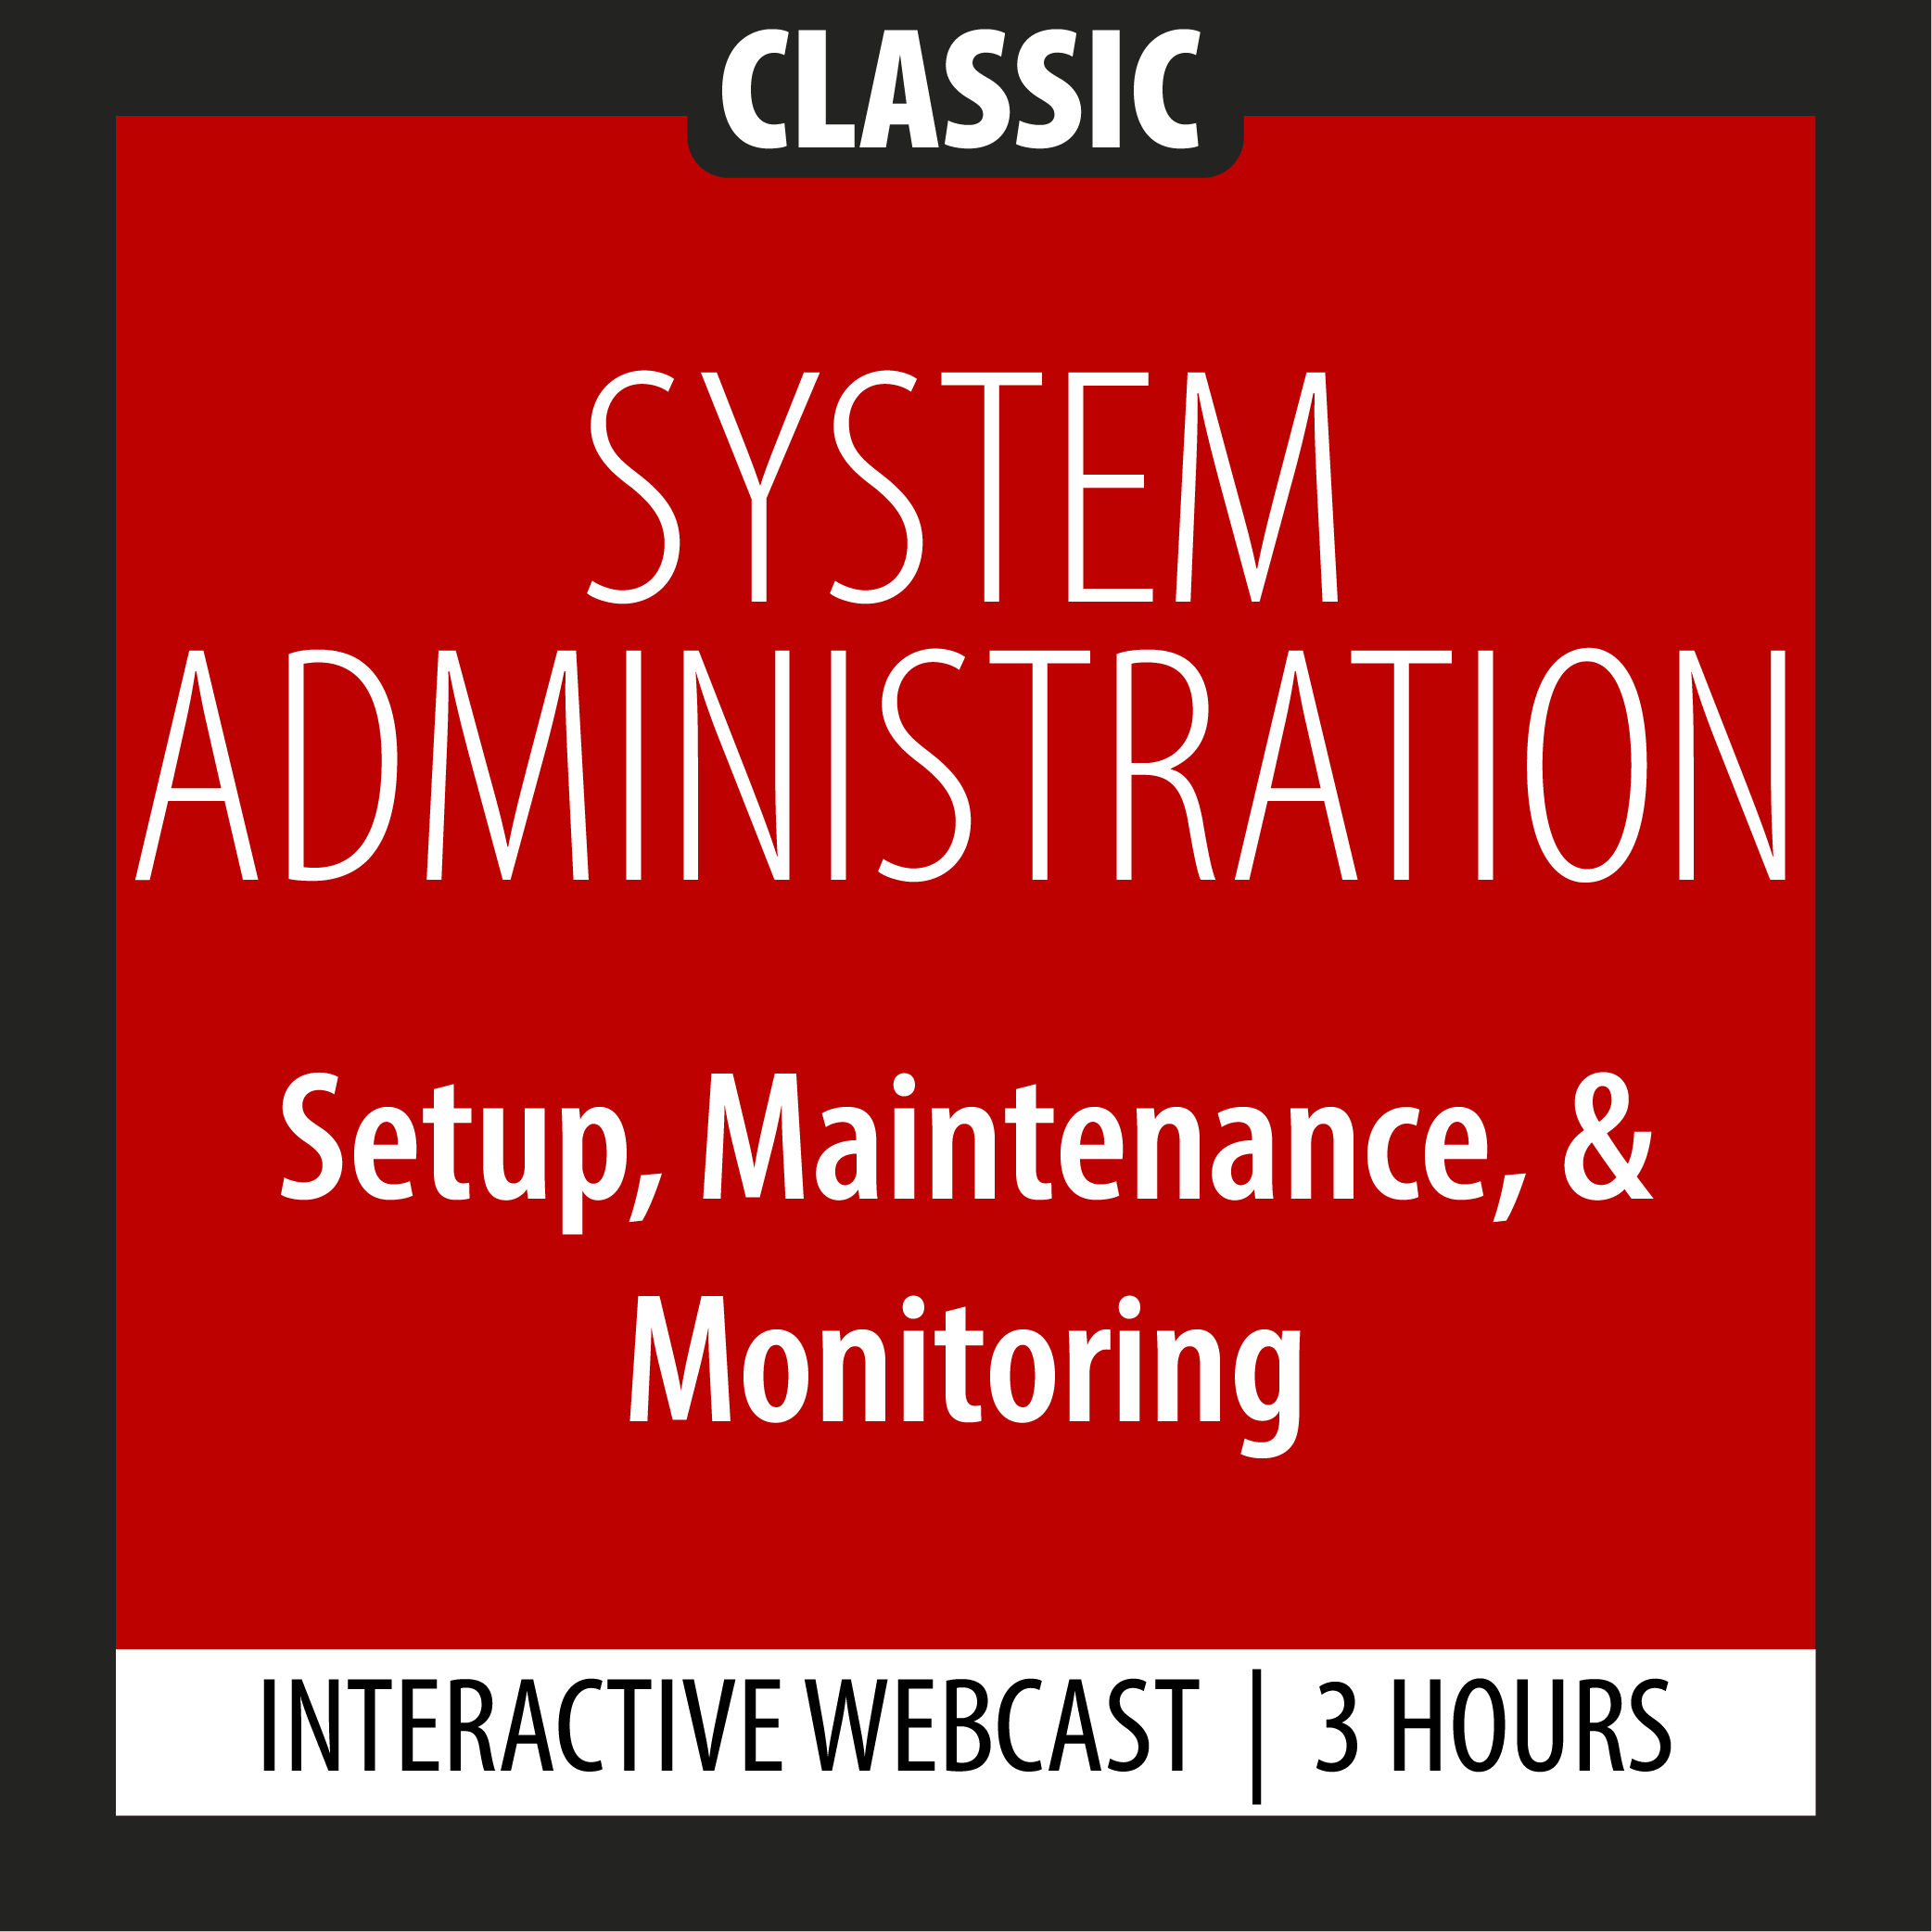 Classic - System Administration - Setup, Maintenance, & Monitoring - Webcast - 3 Hours